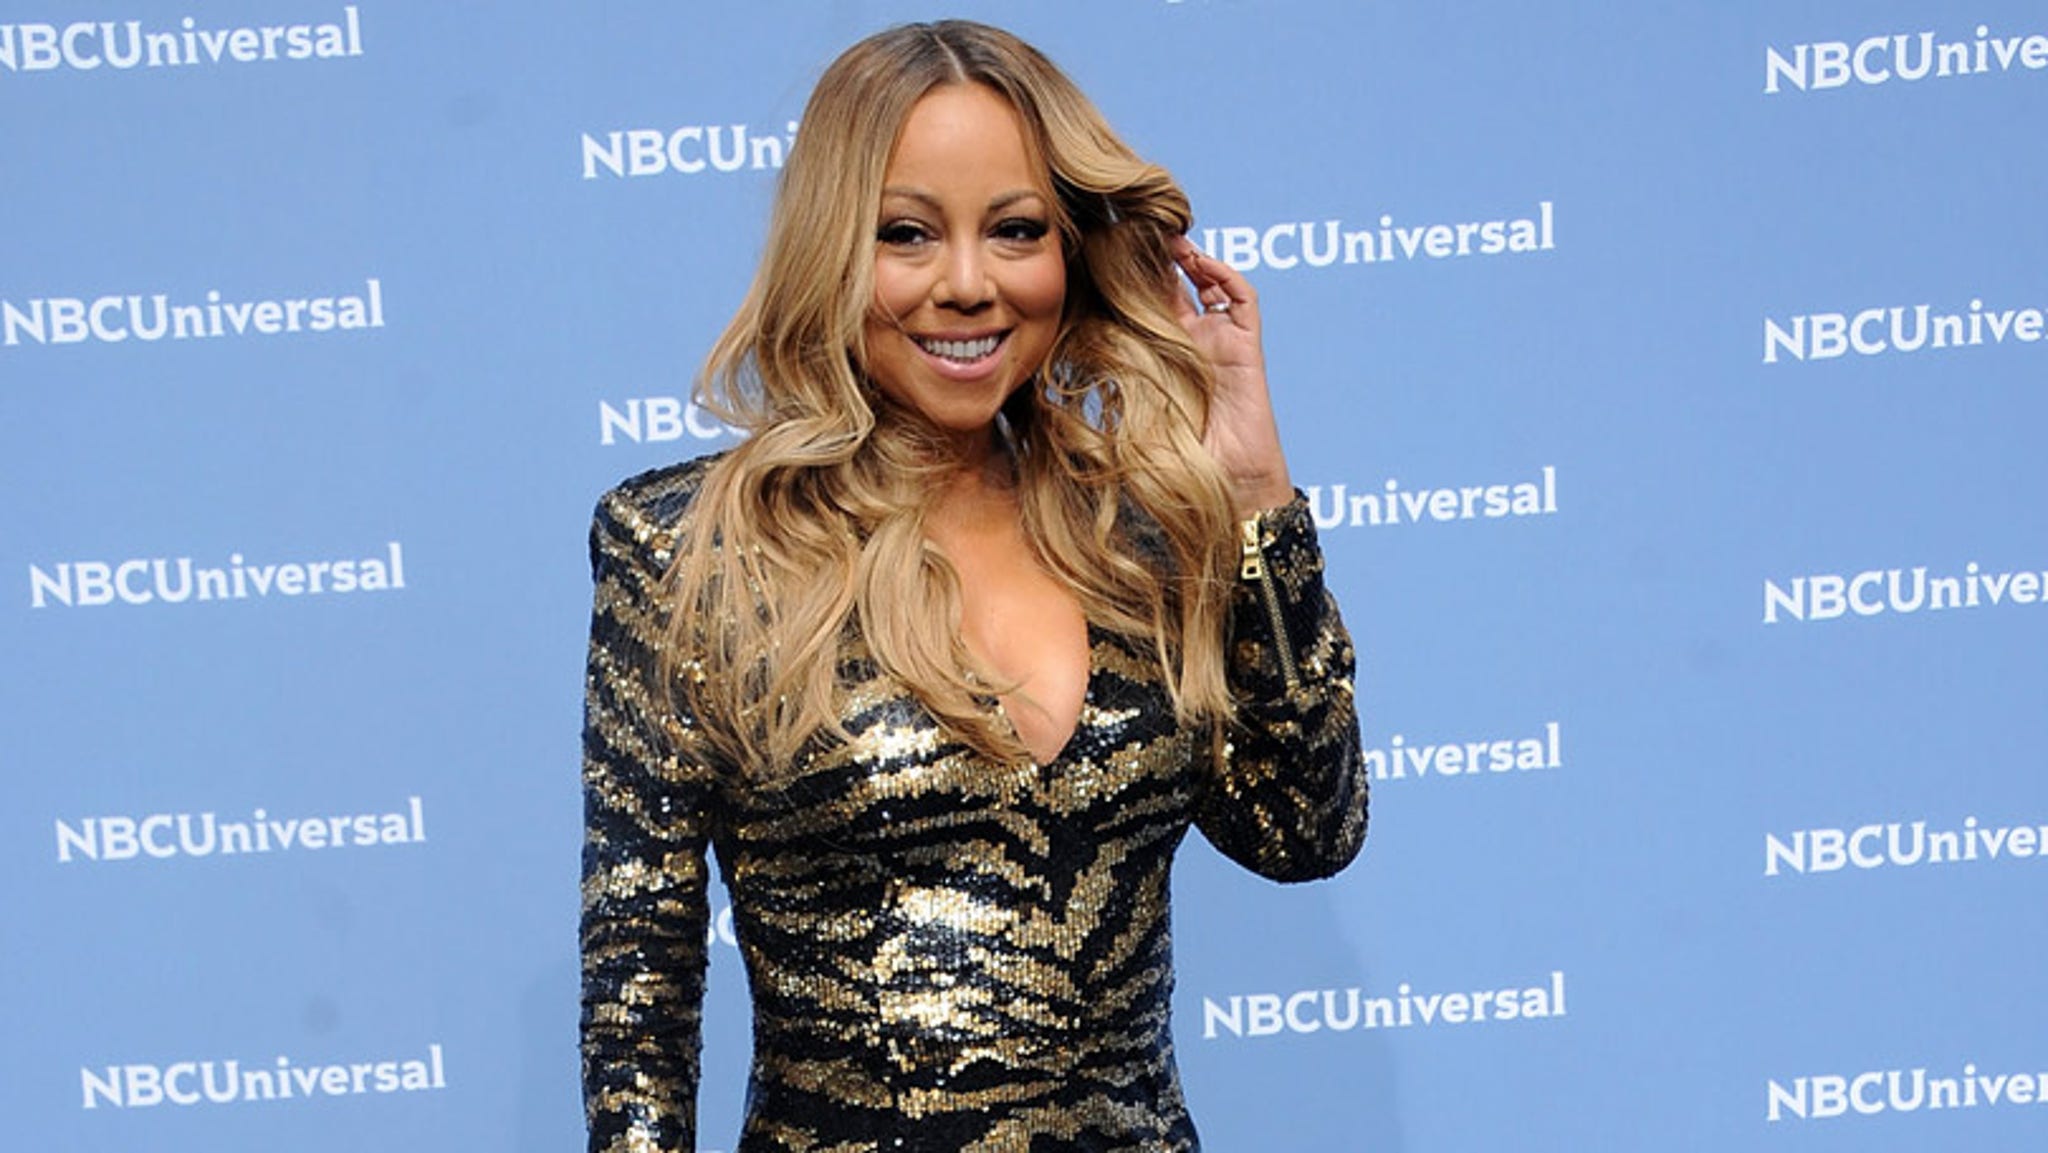 Mariah Carey will never be seen in fluorescent lighting without sunglasses